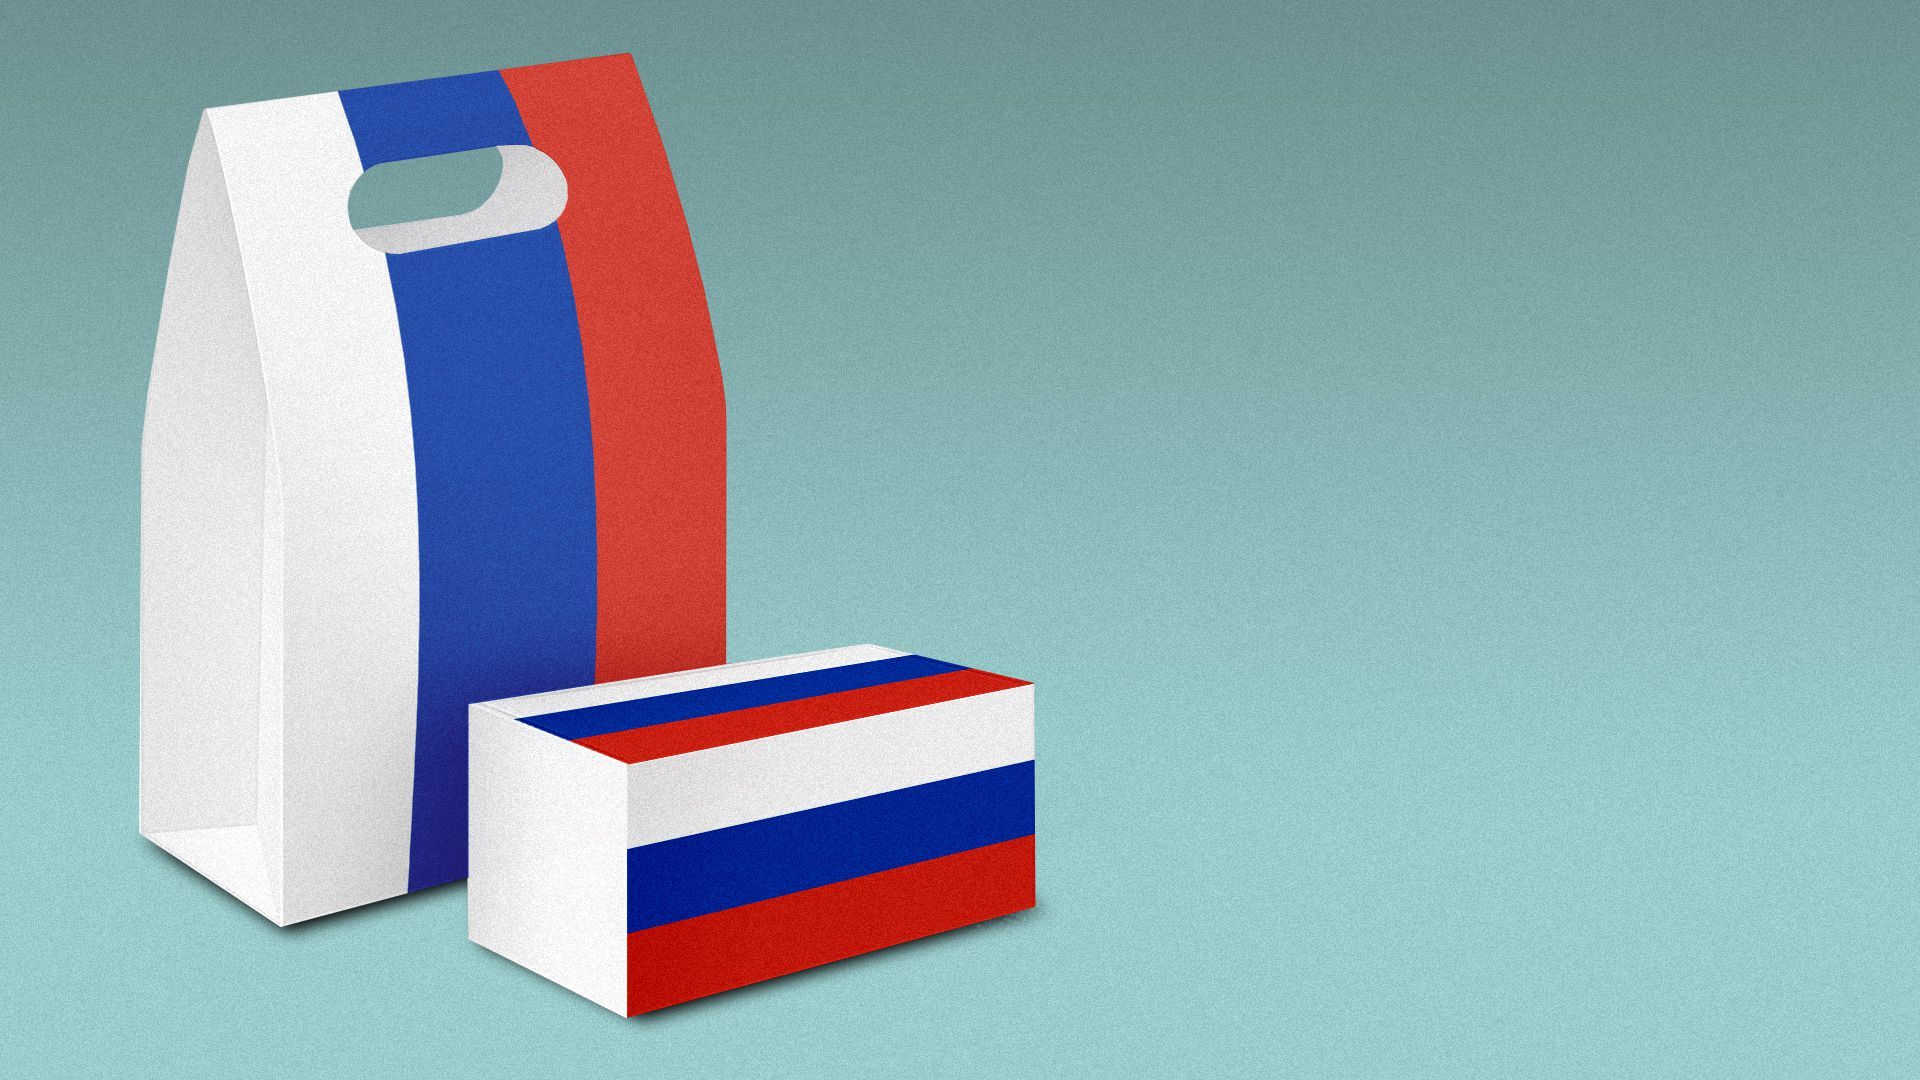 Illustration of a take out bag and food container decorated with the Russian flag stripes